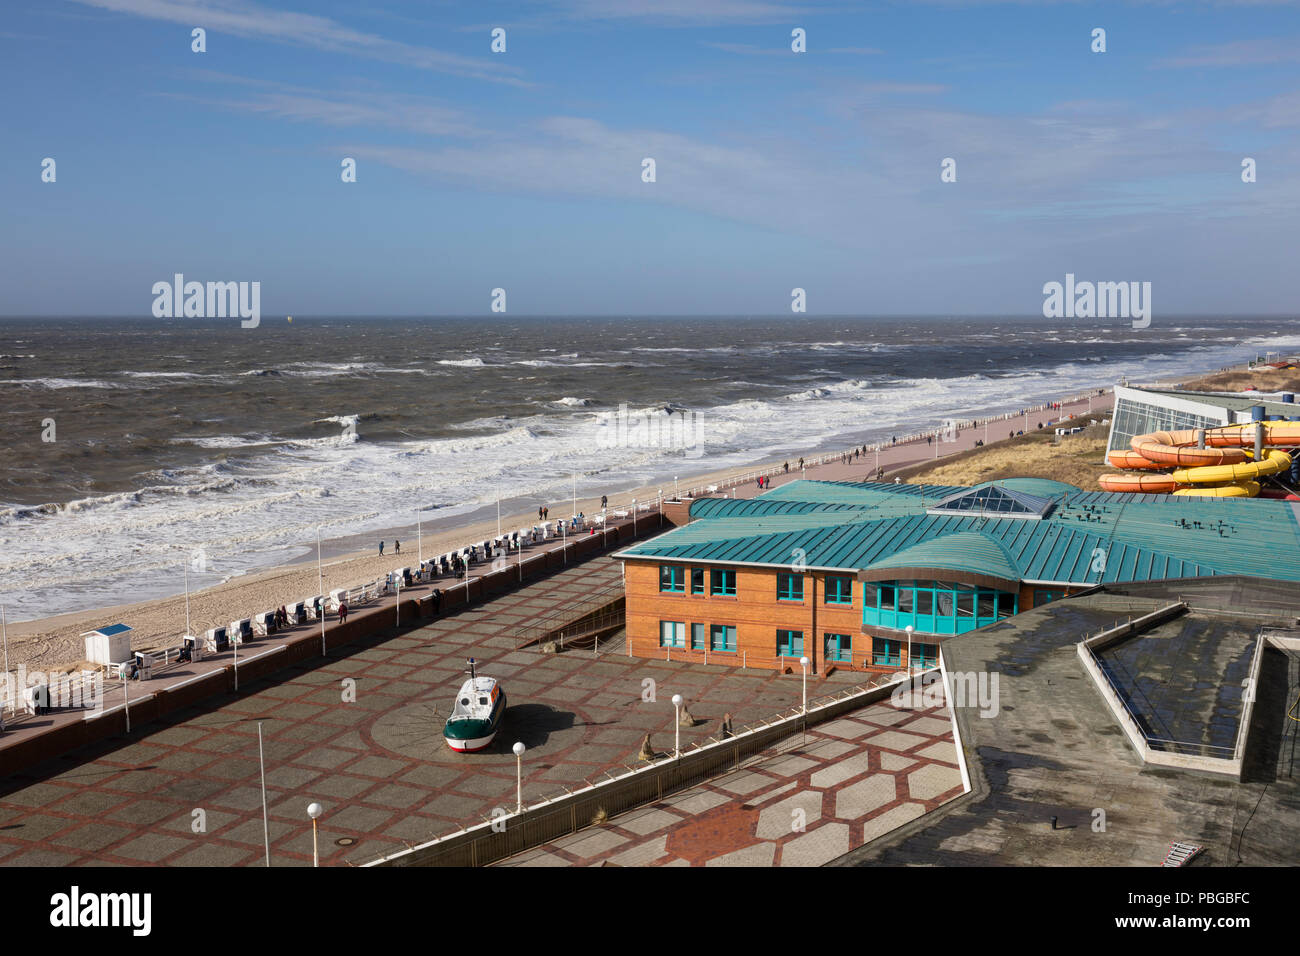 Promenade with swimming bath Sylter Welle, Westerland, Sylt North Frisian Island, Schleswig-Holstein, Germany, Europe Stock Photo